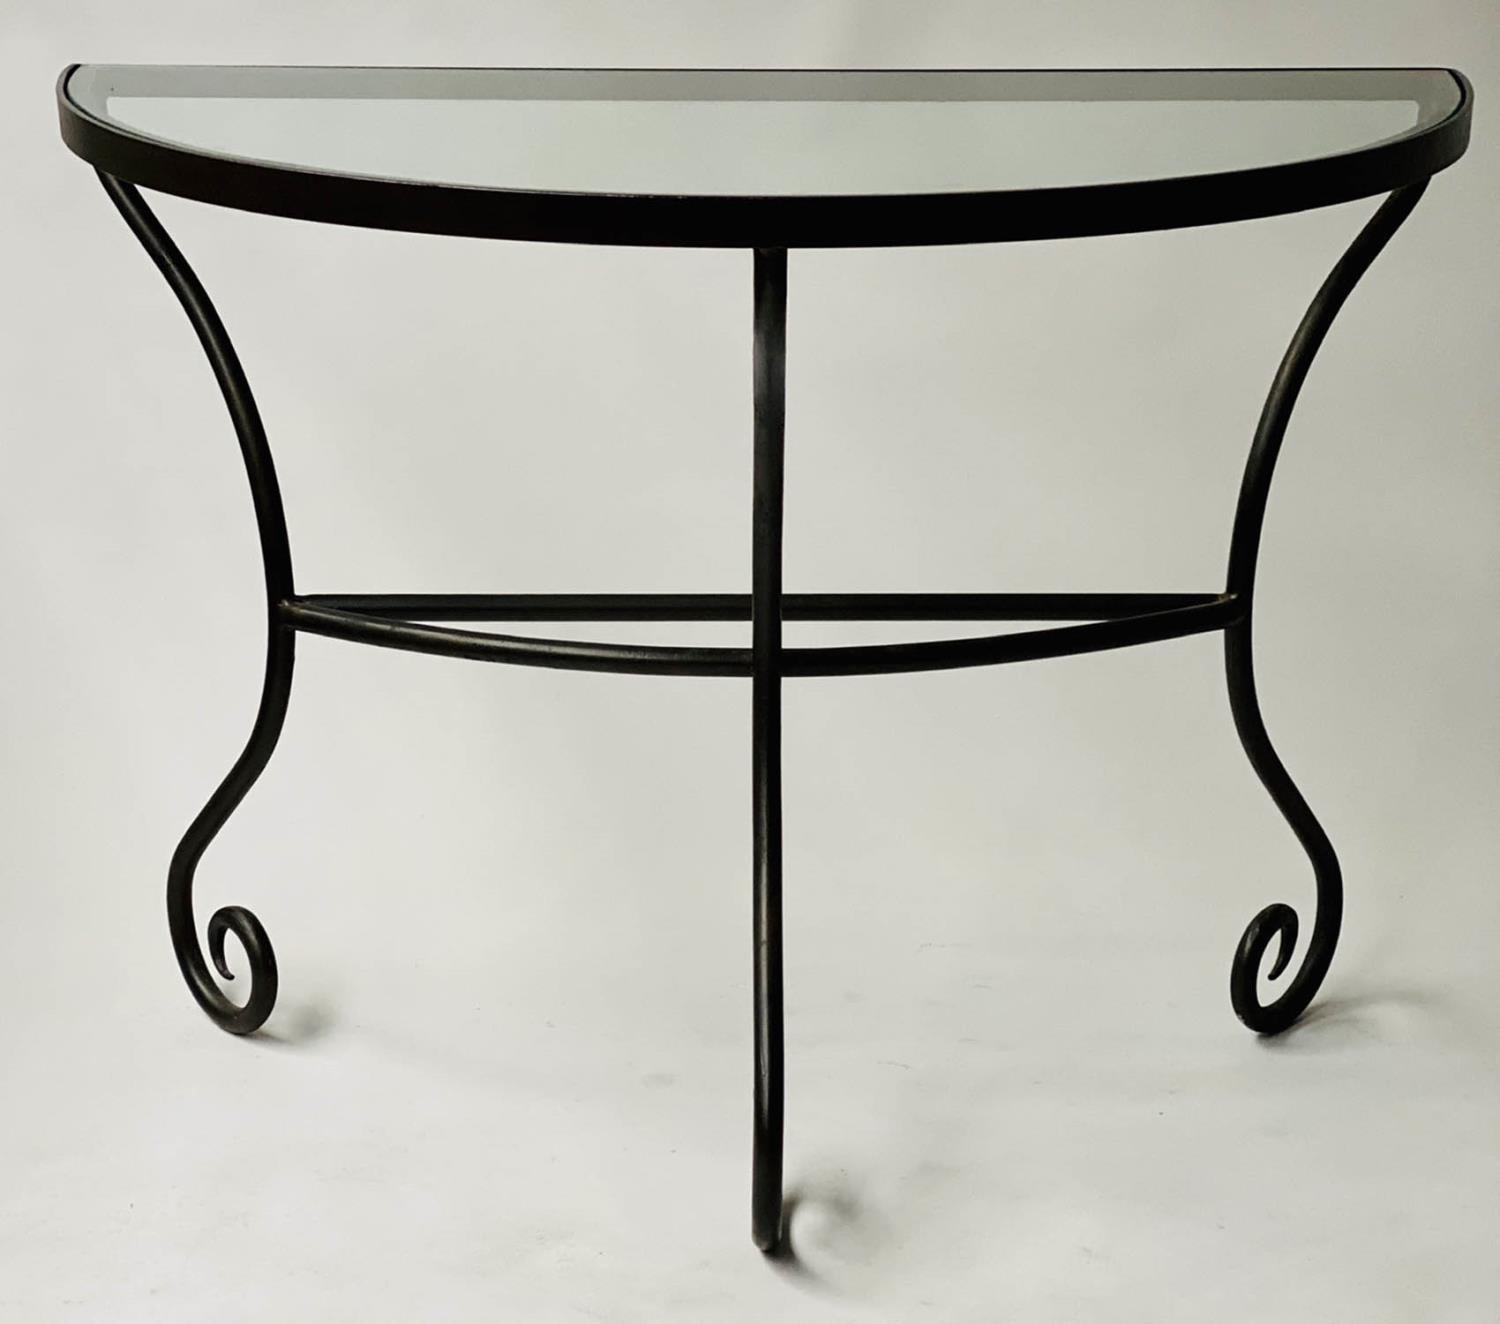 CONSOLE TABLE, Spanish style, semi circular glass, on wrought iron scroll supports, 101cm x 52cm D x